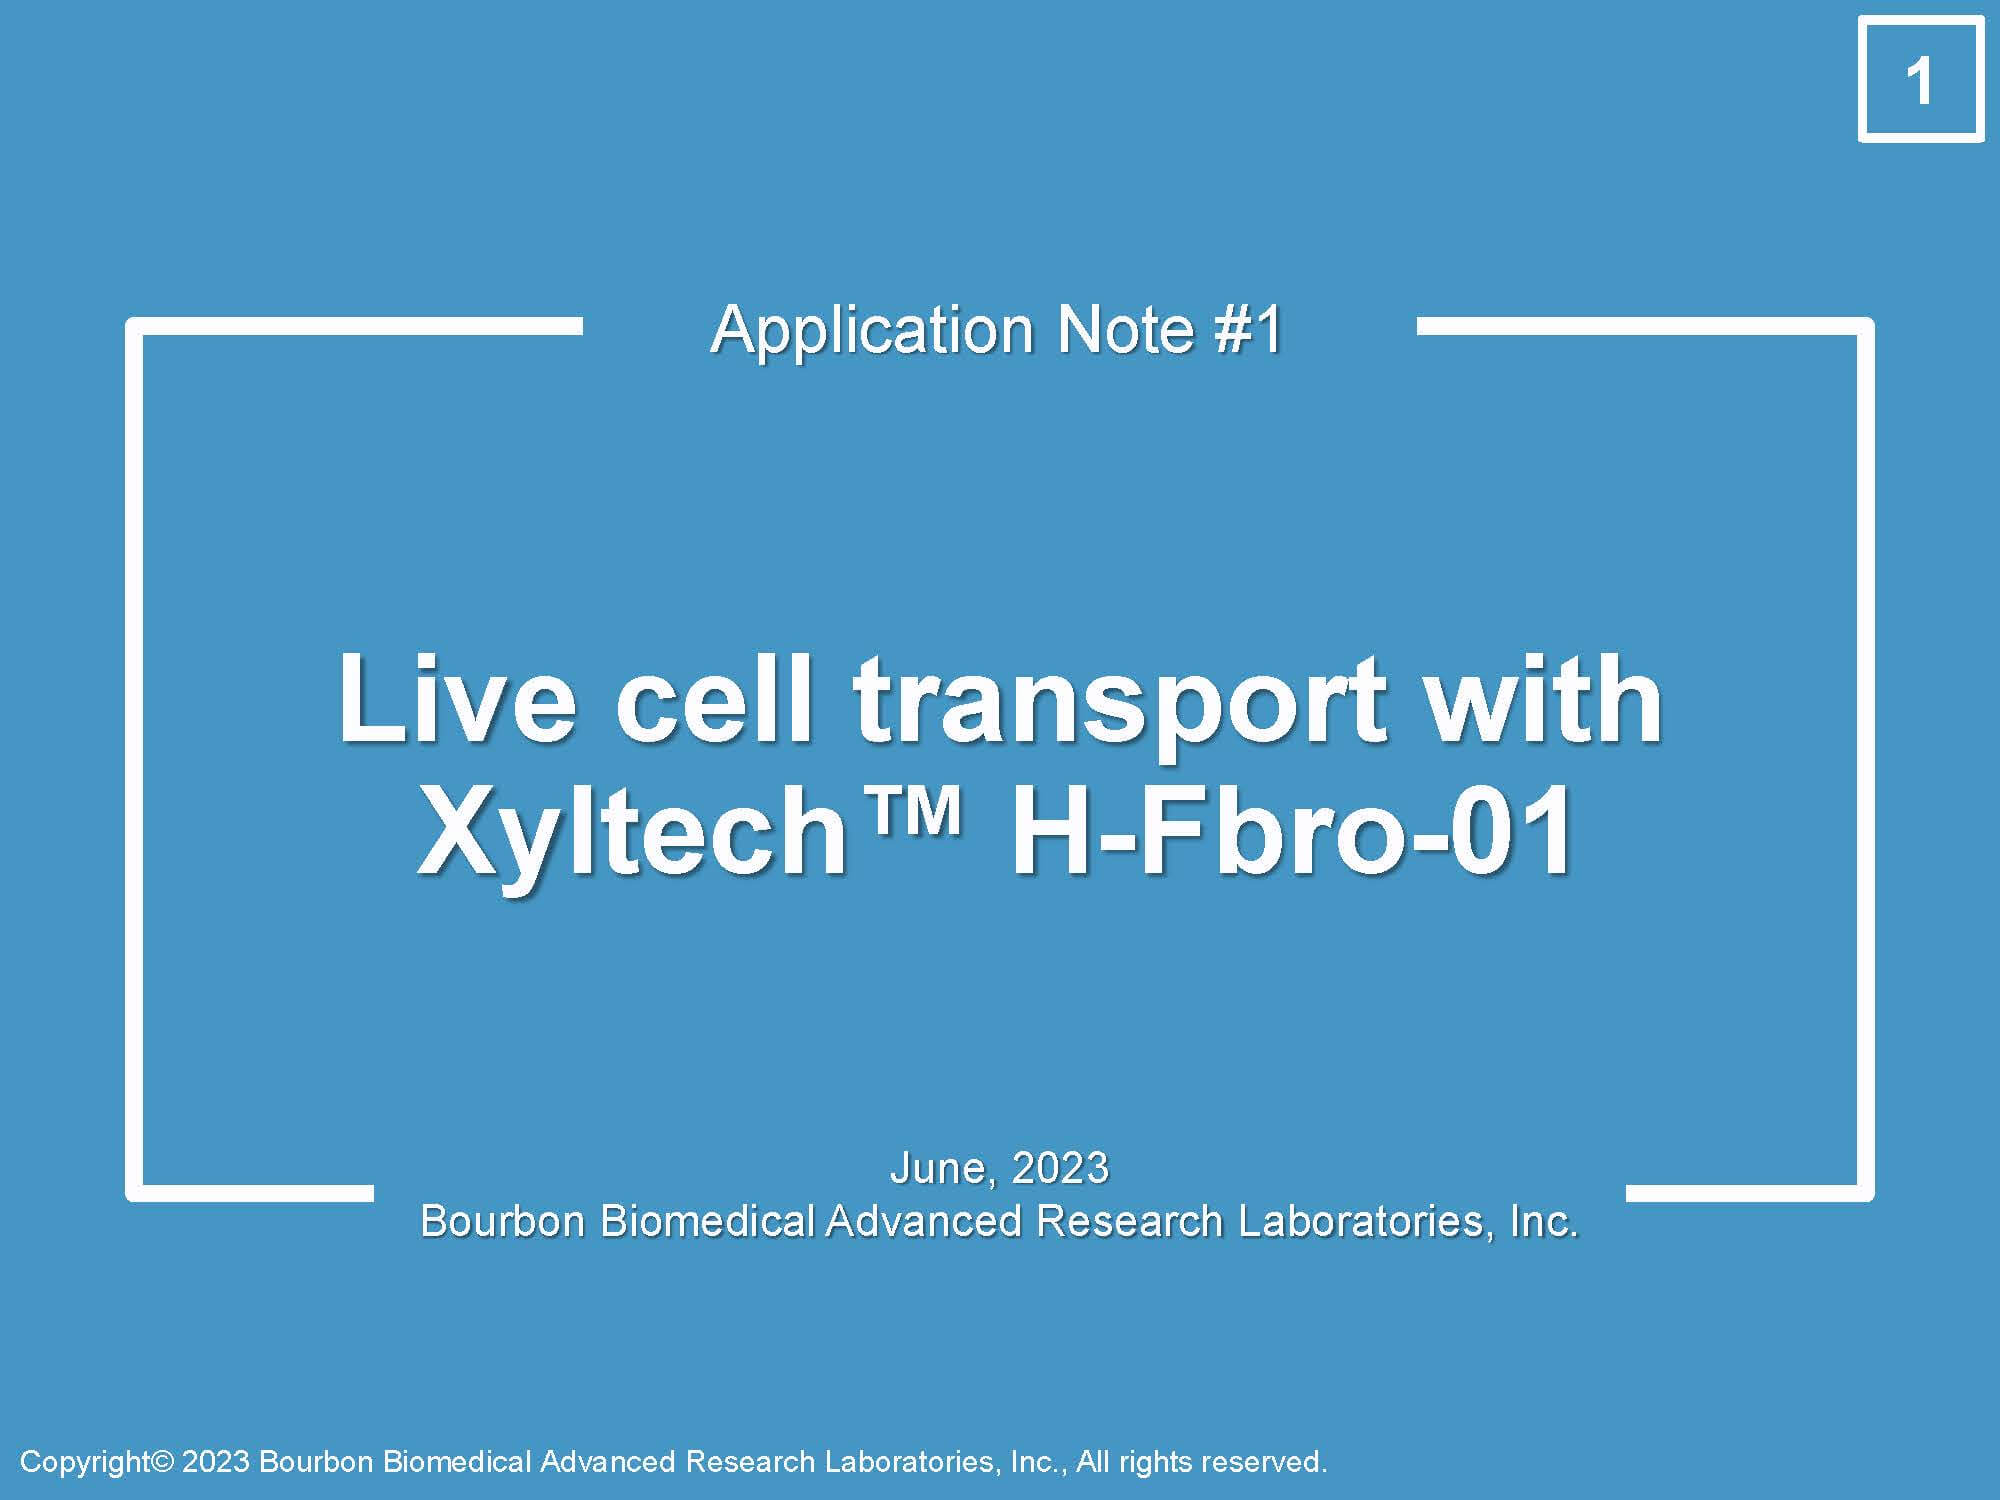 Xyltech_H-fbro-01_Application Note#1